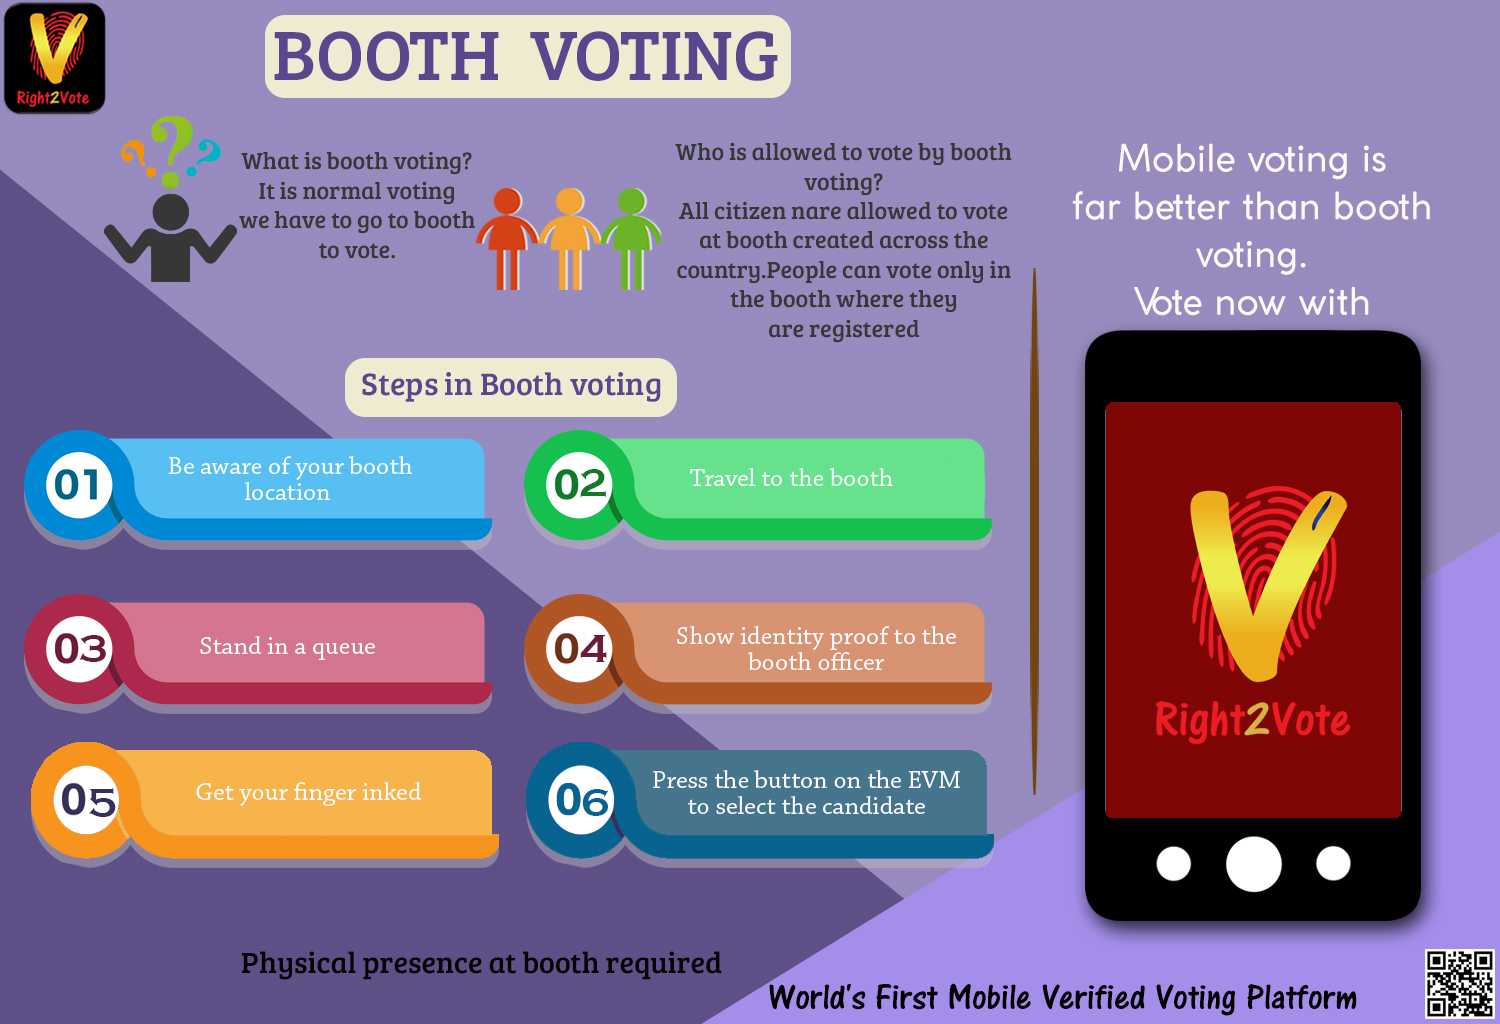 Booth voting - Right2Vote